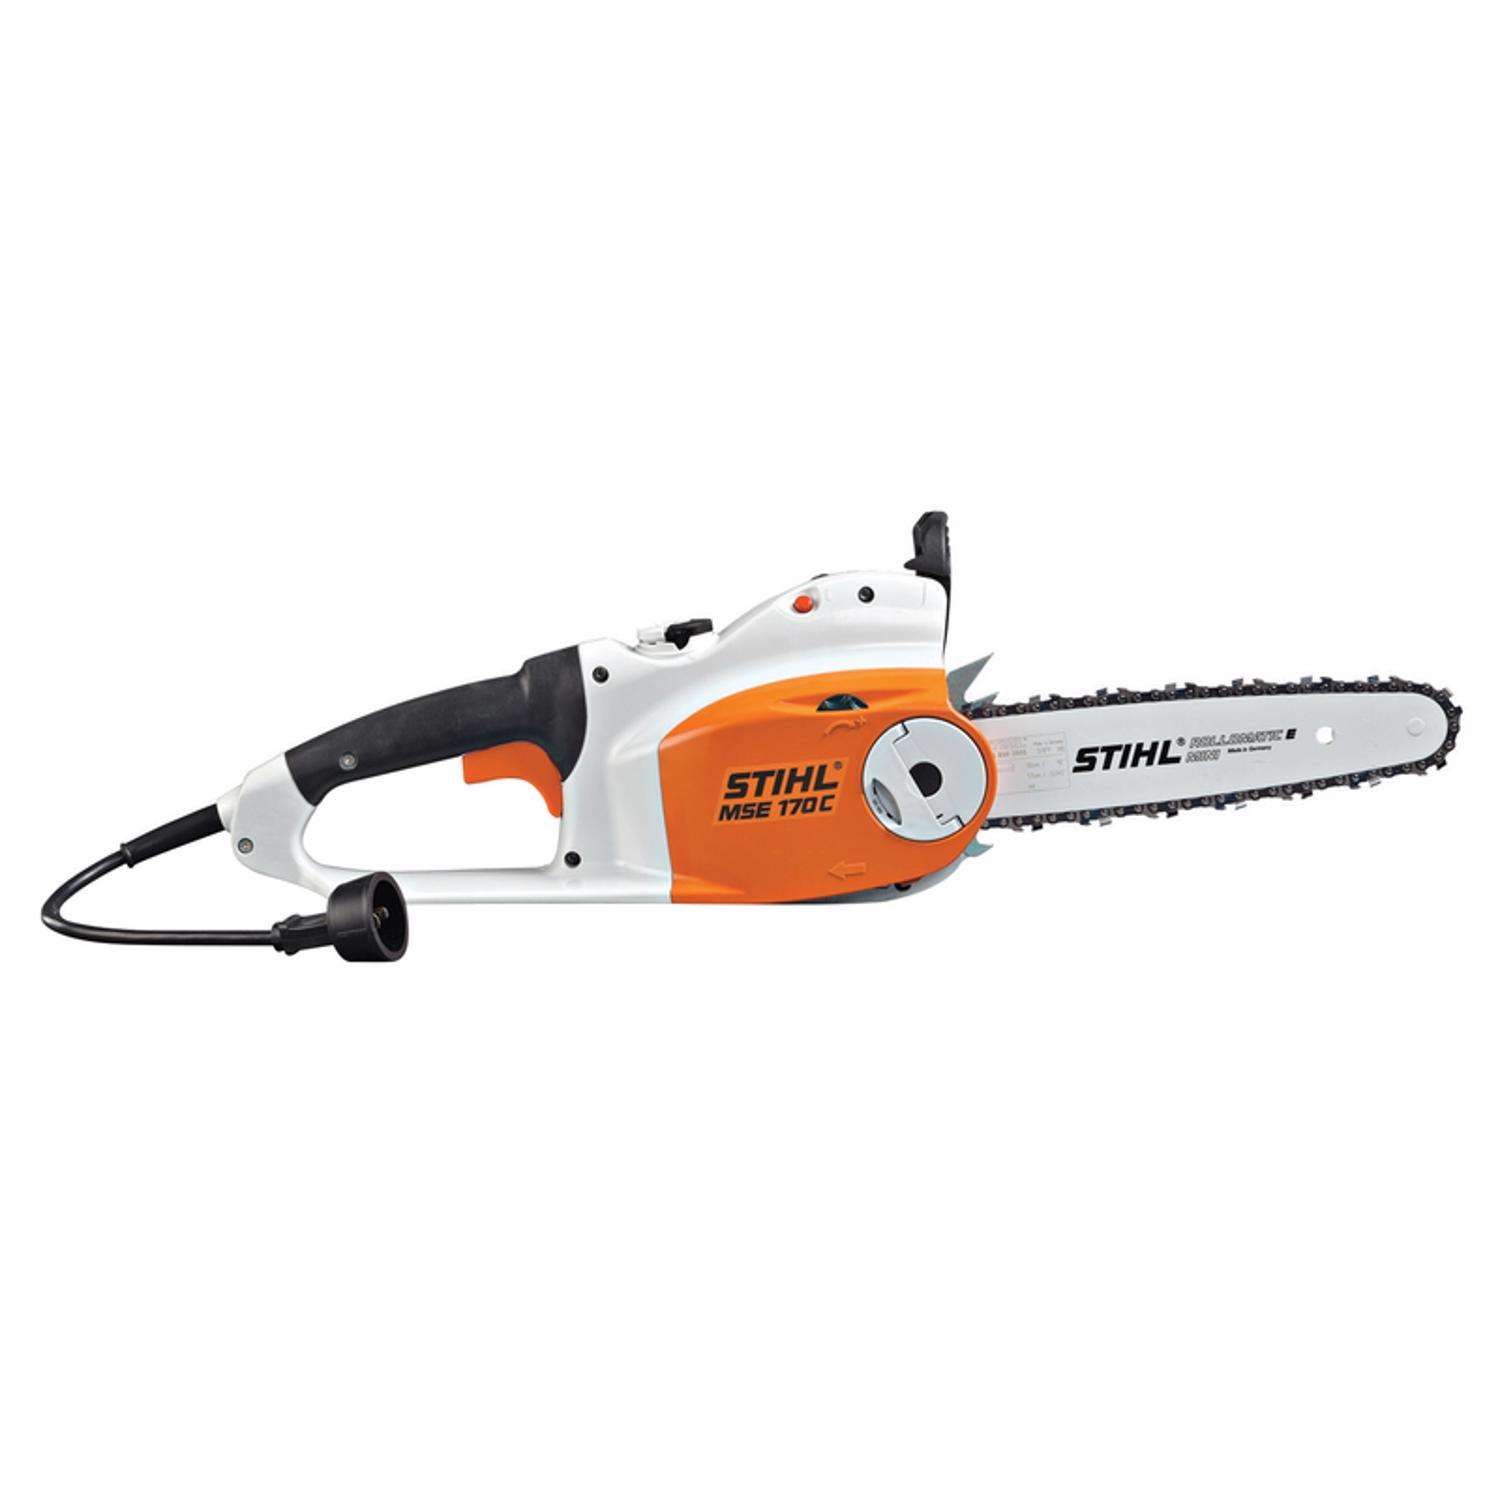 STIHL MSE 170 C-BQ 16 in. 120 V Electric Chainsaw - Ace Hardware